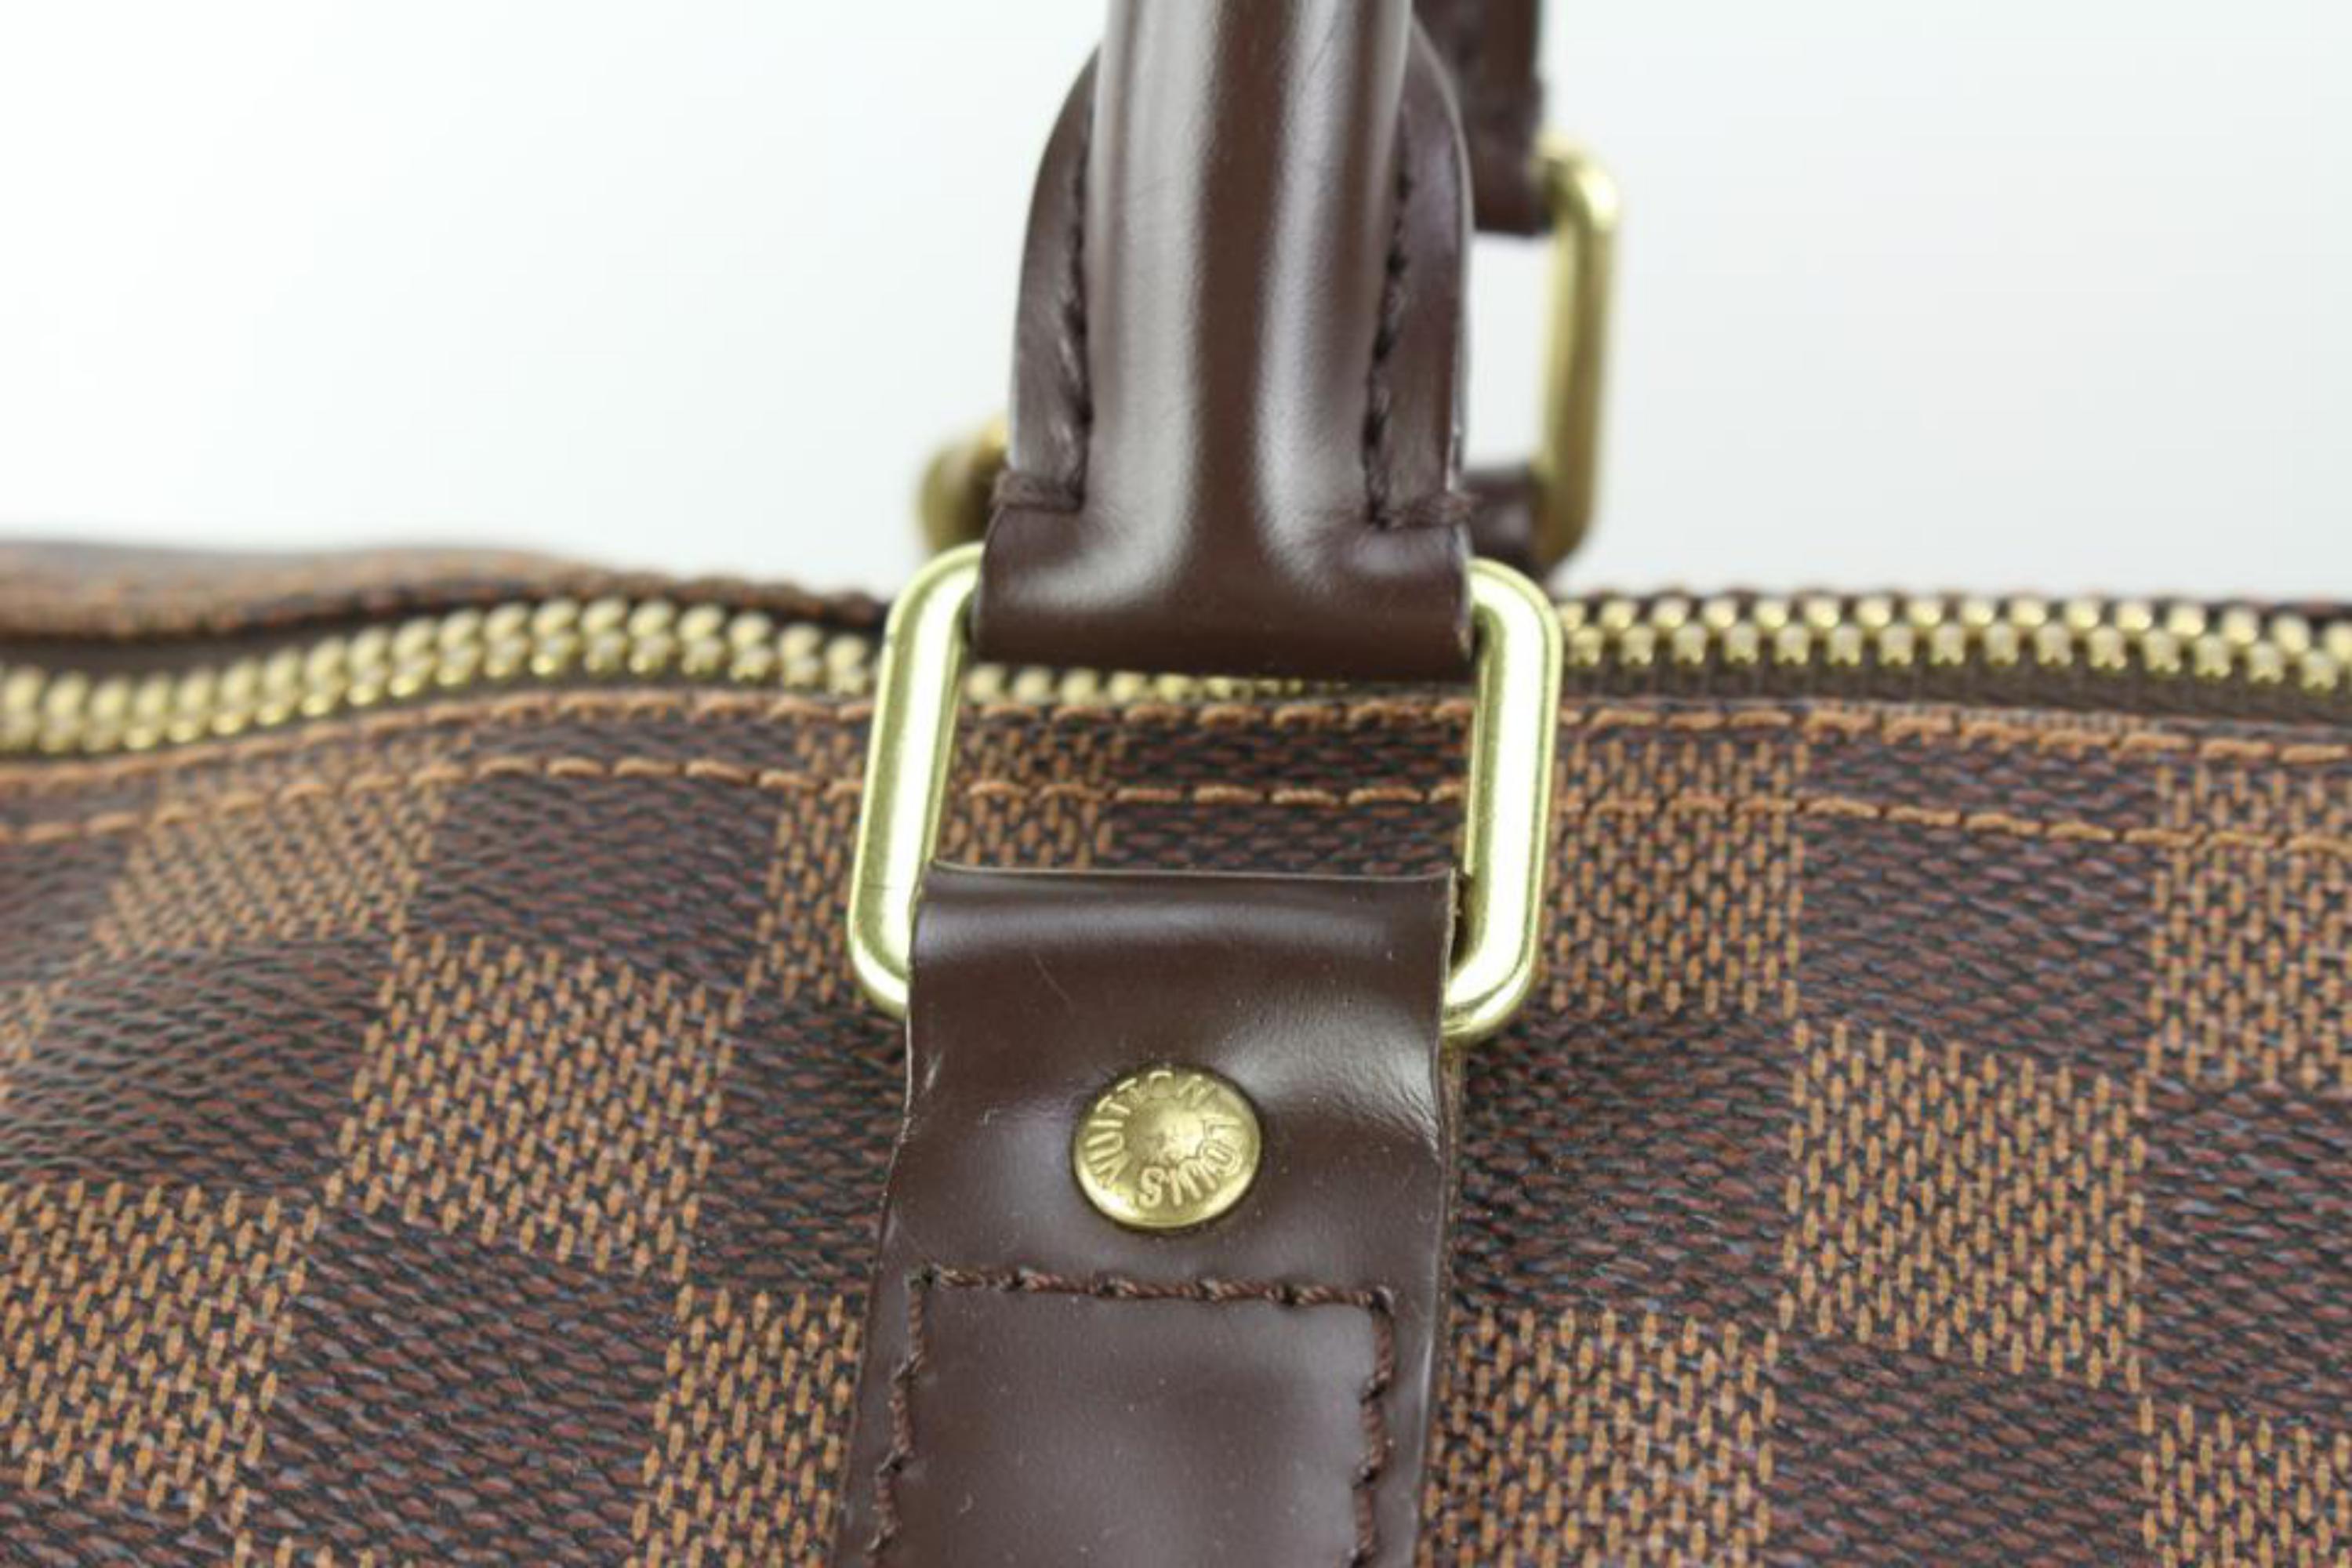 Louis Vuitton Damier Ebene Keepall 50 Duffle Bag Upcycle Ready 54lz429s In Good Condition For Sale In Dix hills, NY